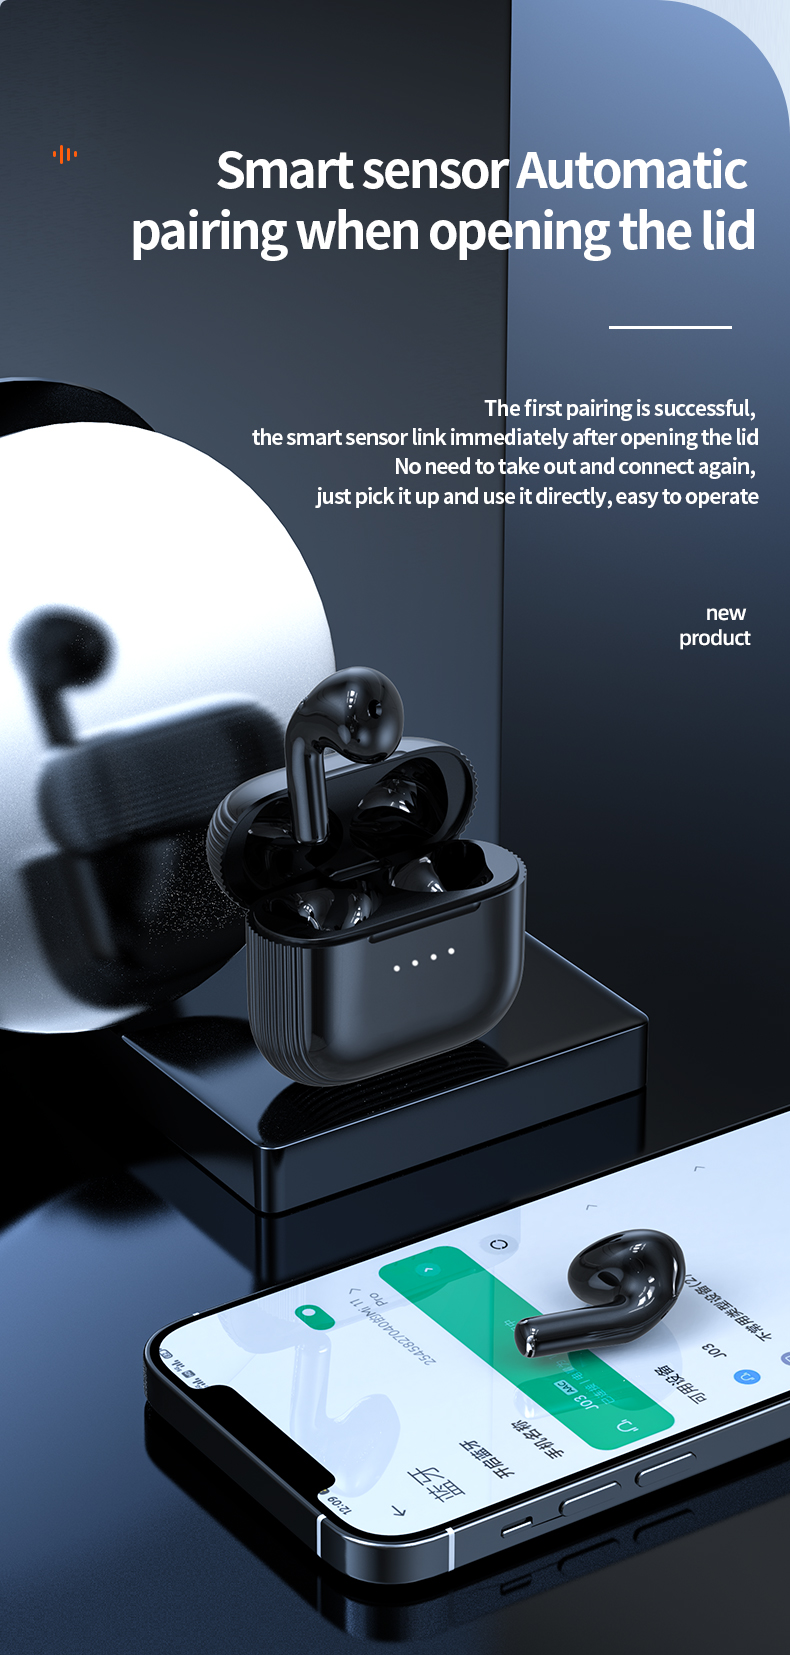 Bakeey-J03-bluetooth-50-Earphones-13mm-Dynamic-Earbuds-Touch-Control-Bass-Boost-Stereo-Sound-Headset-1909289-6